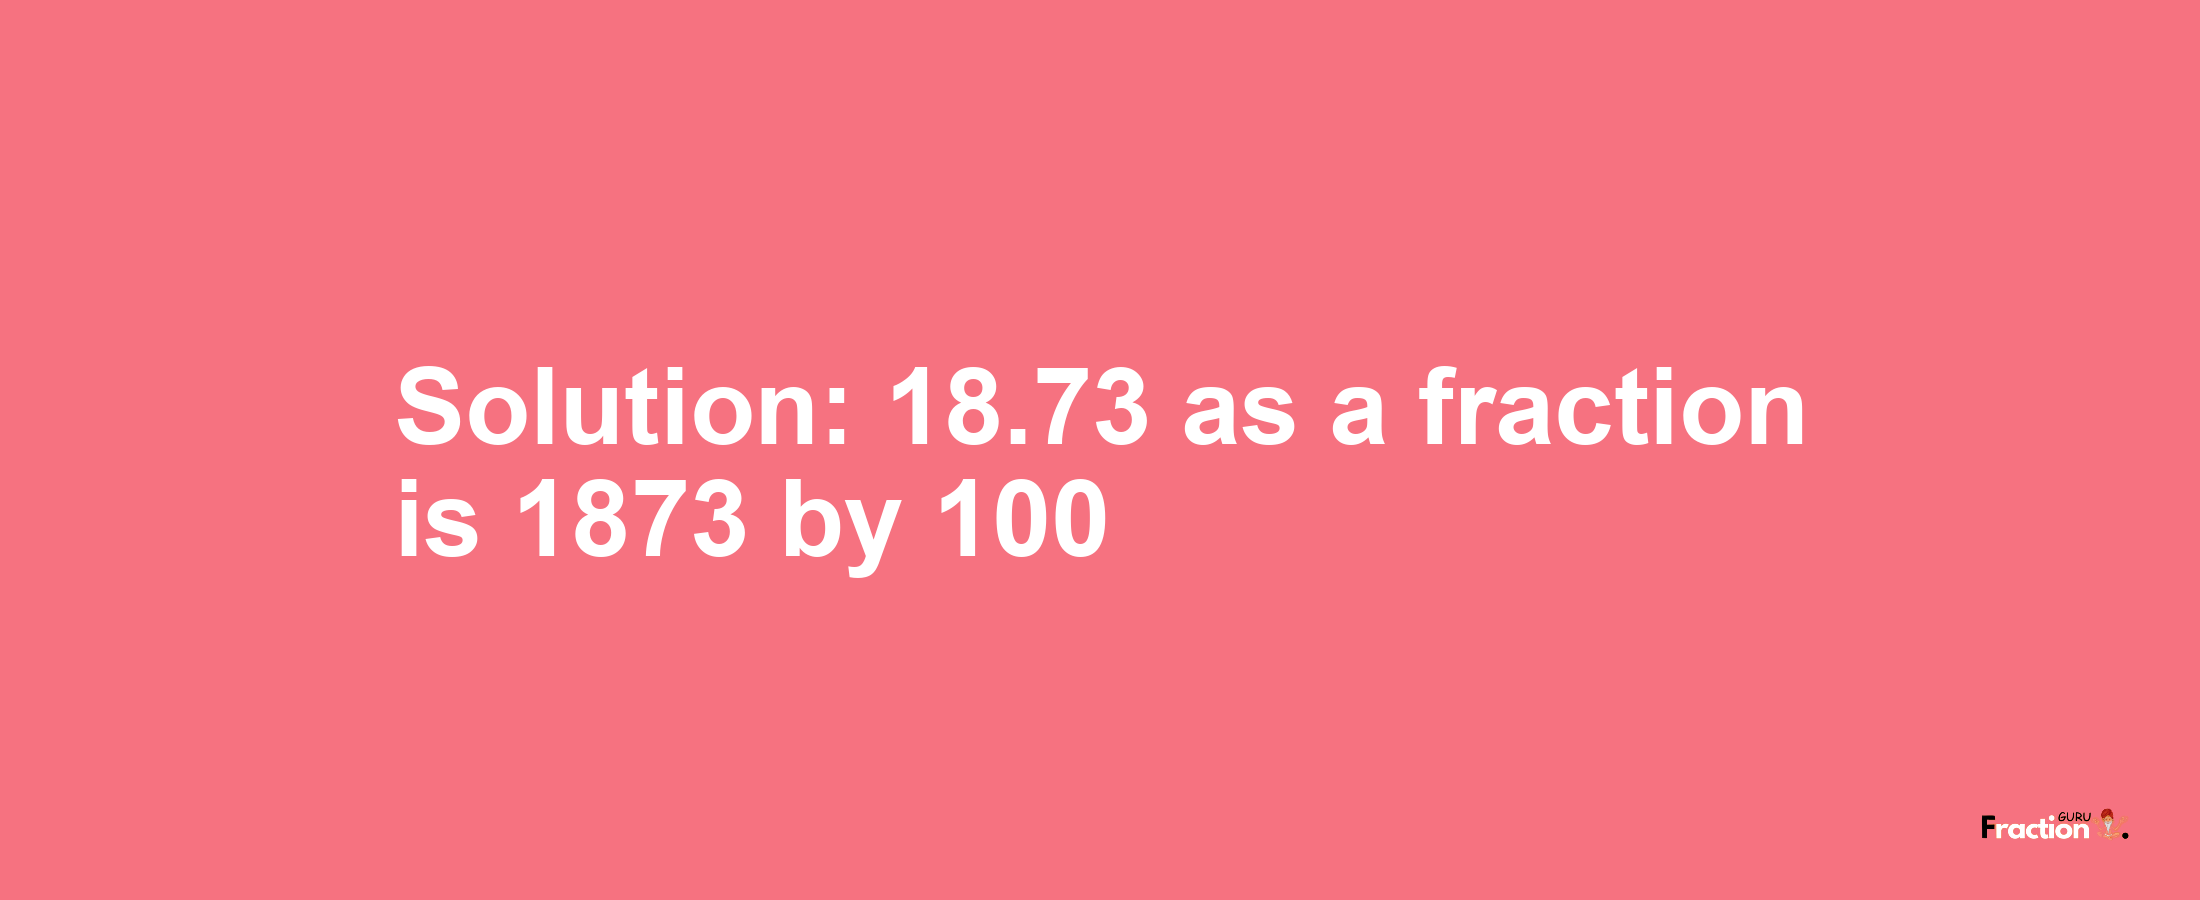 Solution:18.73 as a fraction is 1873/100